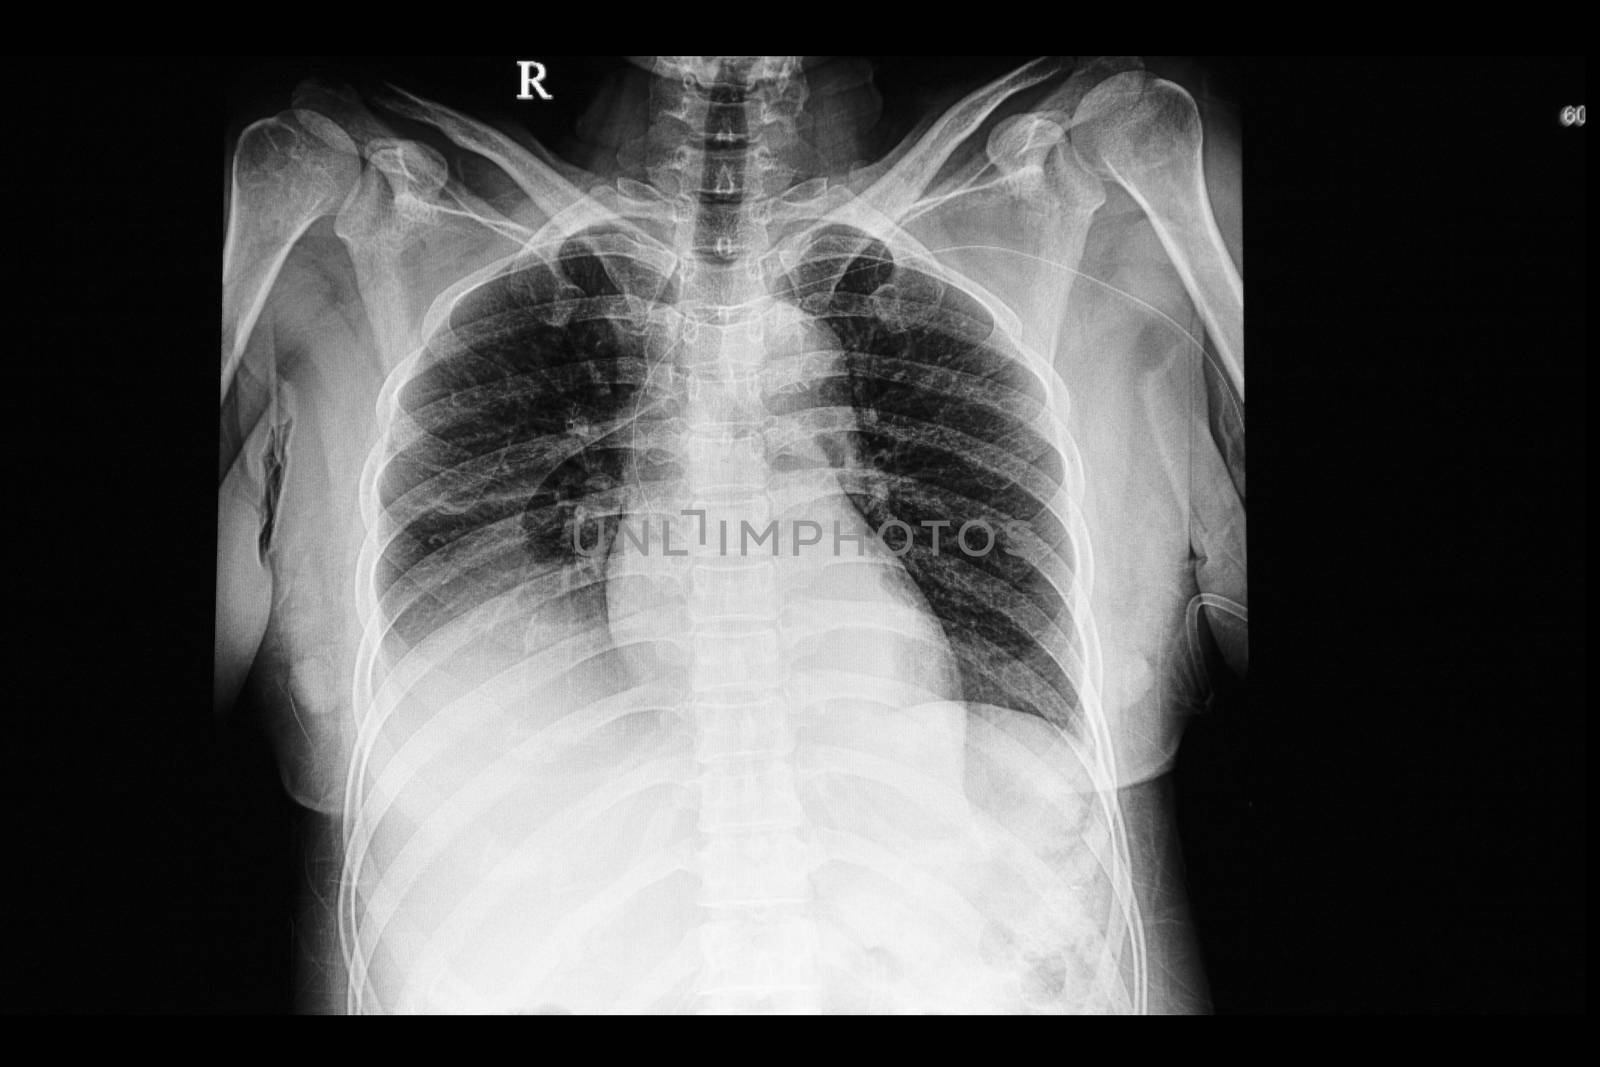 A chest xray film of a patient with pulmonary edema, cephalizaion, and pleural effusions. of both lungs. A right heart venous catheter is also shown.